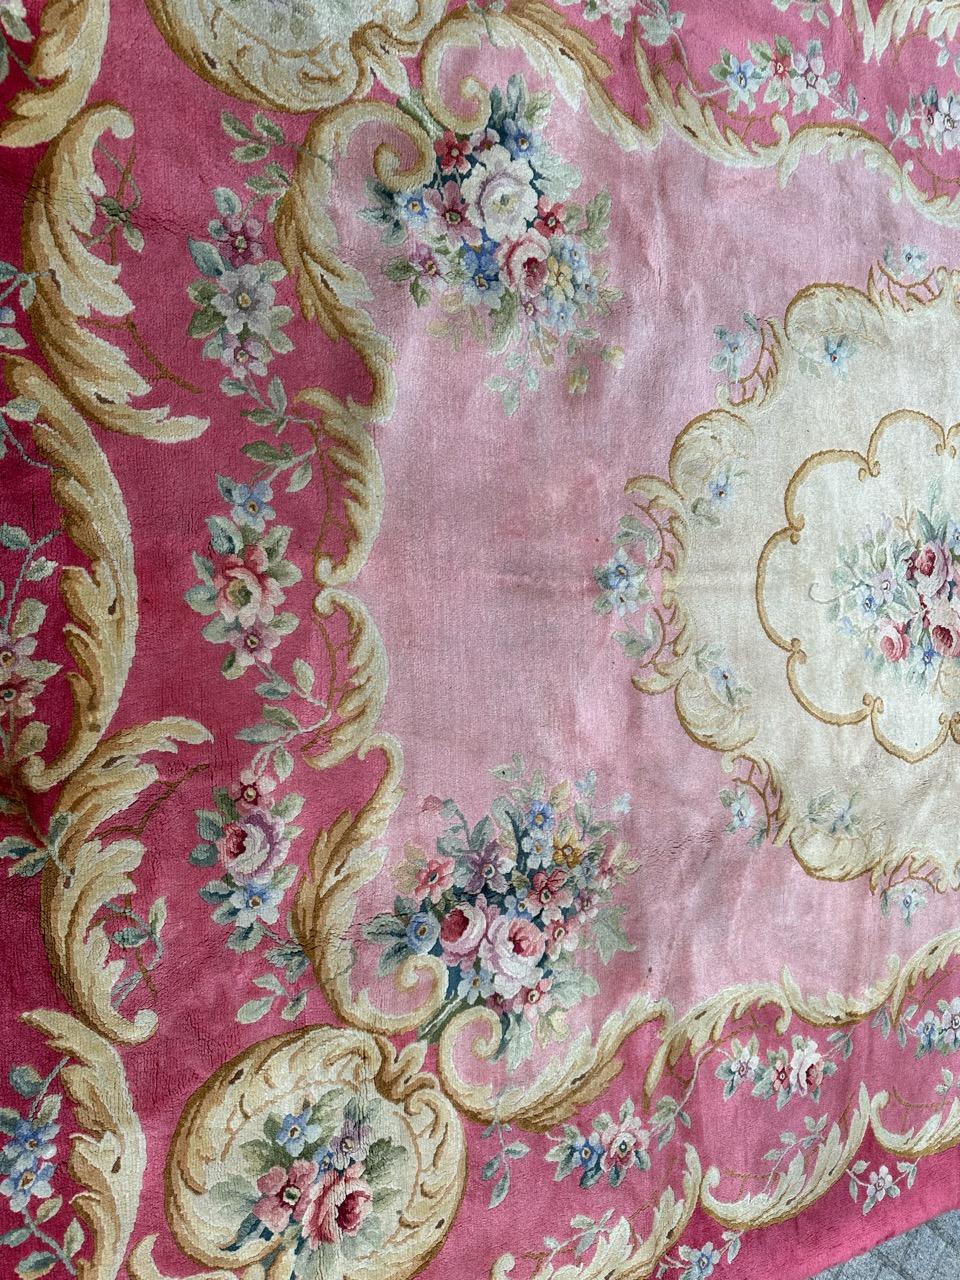 Discover an exquisite antique French Savonnerie rug like no other! This masterpiece captures the elegance of the Napoleon III style, boasting a stunning floral design that evokes timeless beauty. Crafted with meticulous care, it's a true work of